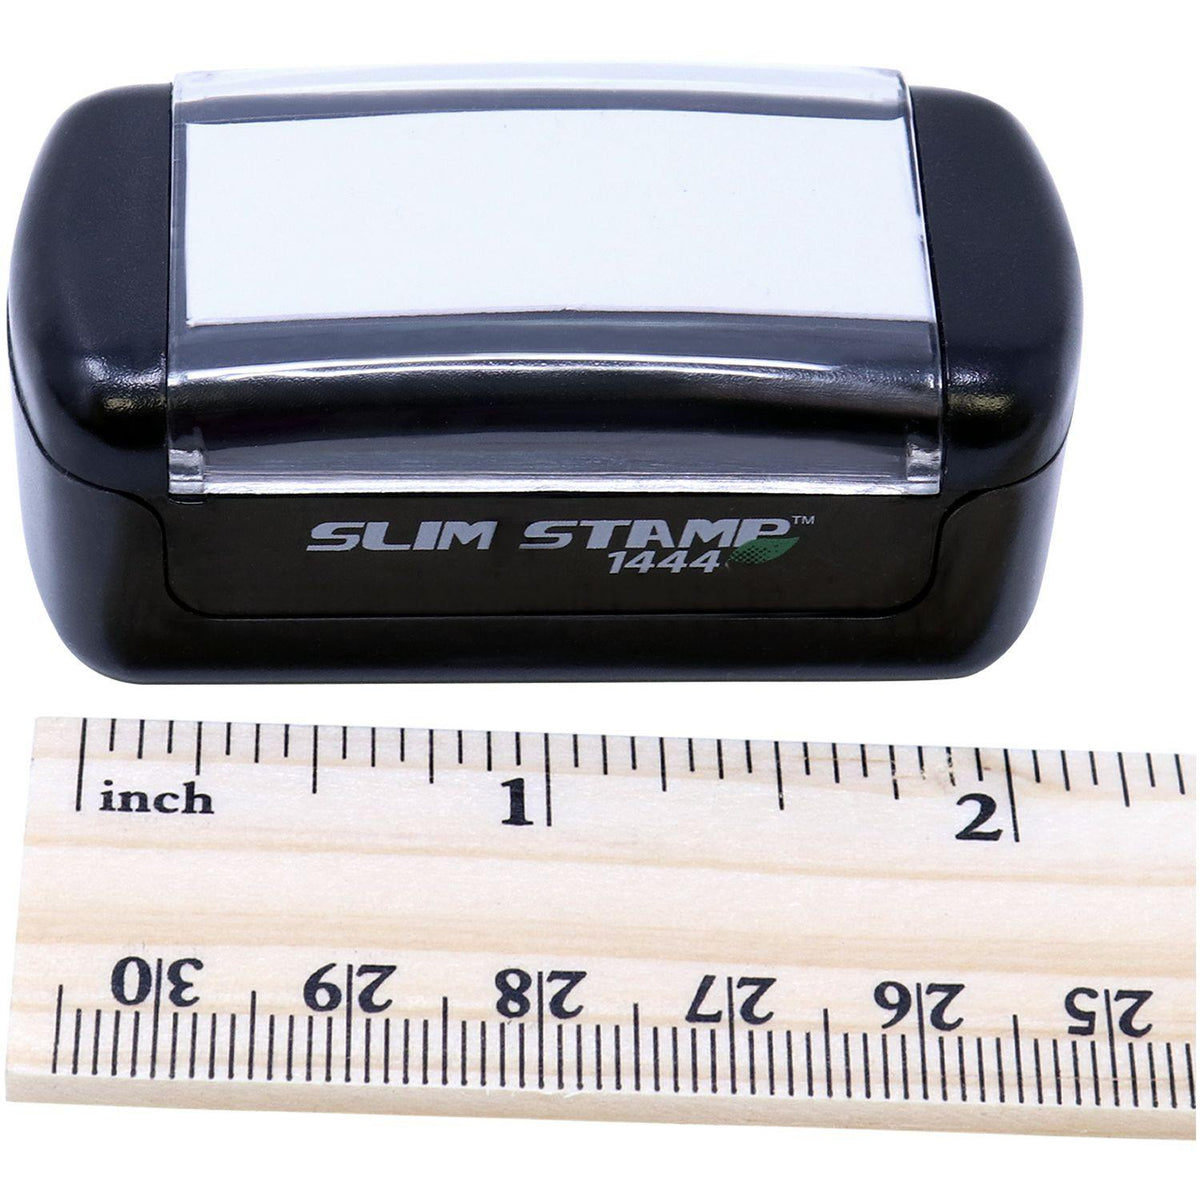 Slim Pre Inked Amazing Stamp - Engineer Seal Stamps - Brand_Slim, Impression Size_Small, Stamp Type_Pre-Inked Stamp, Type of Use_Teacher